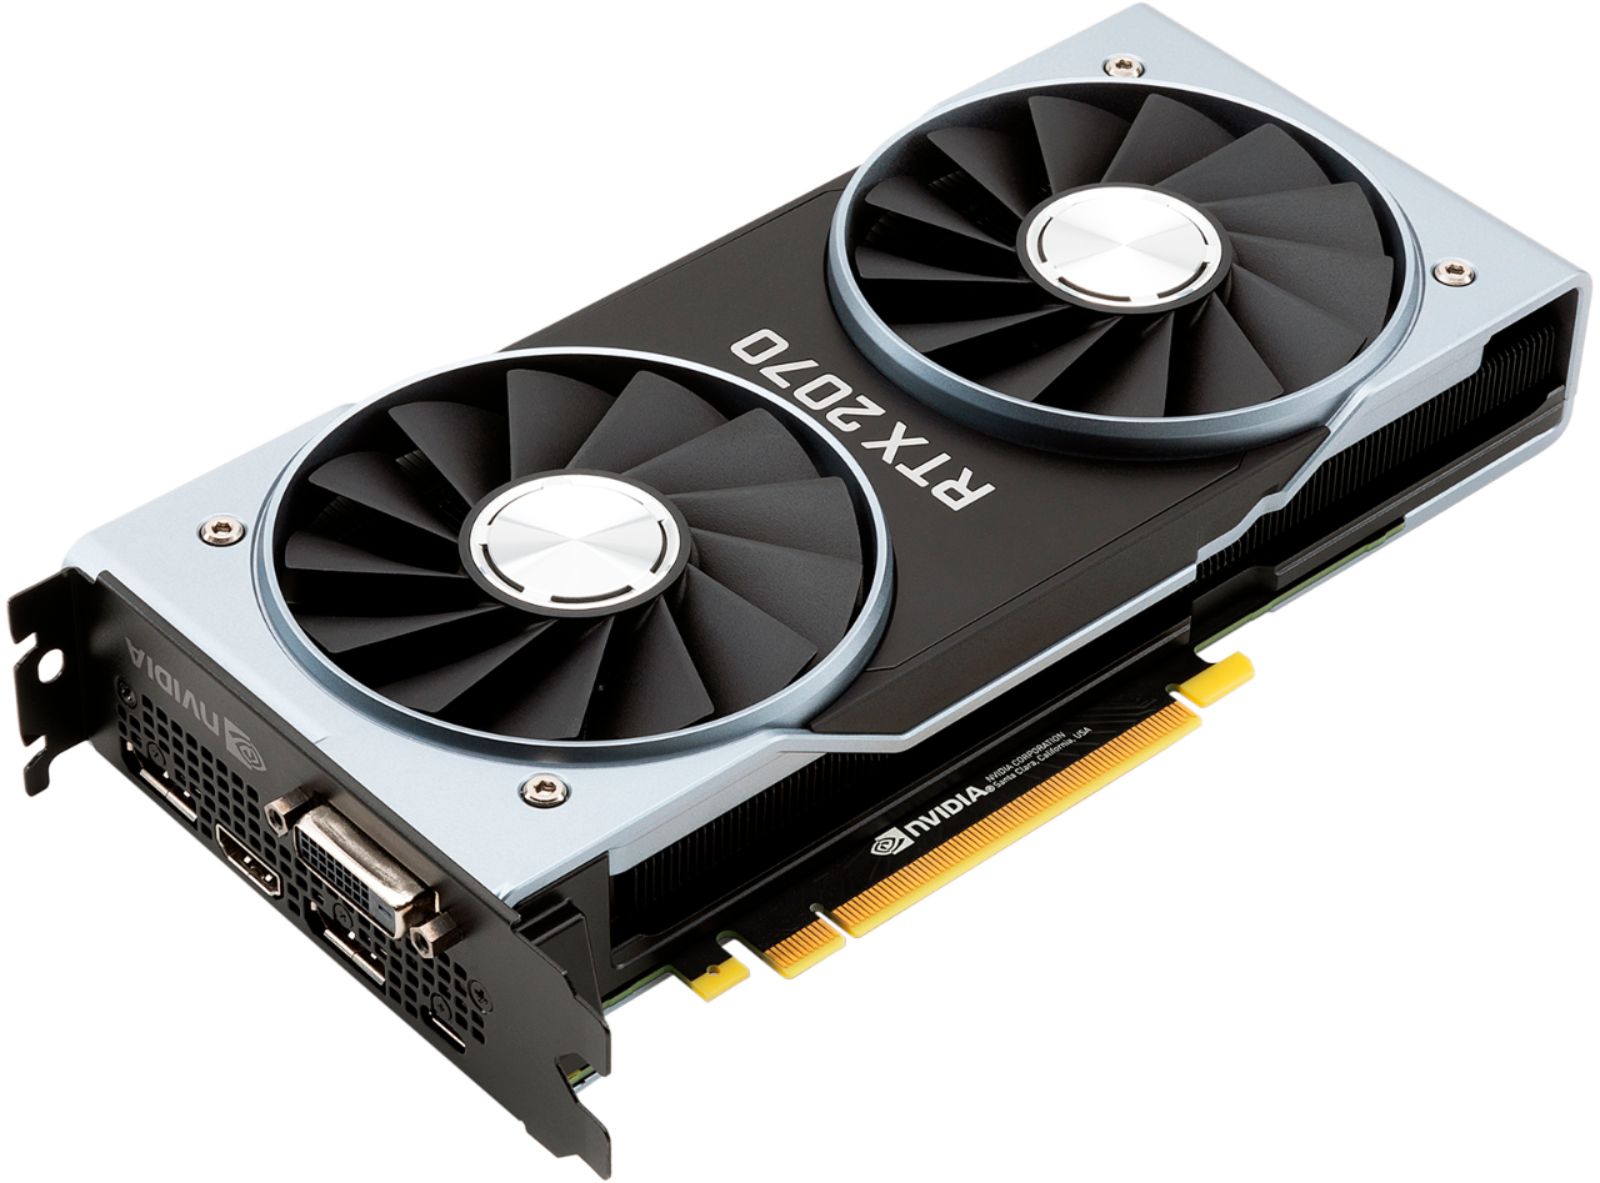 Logisk september grus Best Buy: NVIDIA GeForce RTX 2070 Founders Edition 8GB GDDR6 PCI Express  3.1 Graphics Card 9001G1602550000